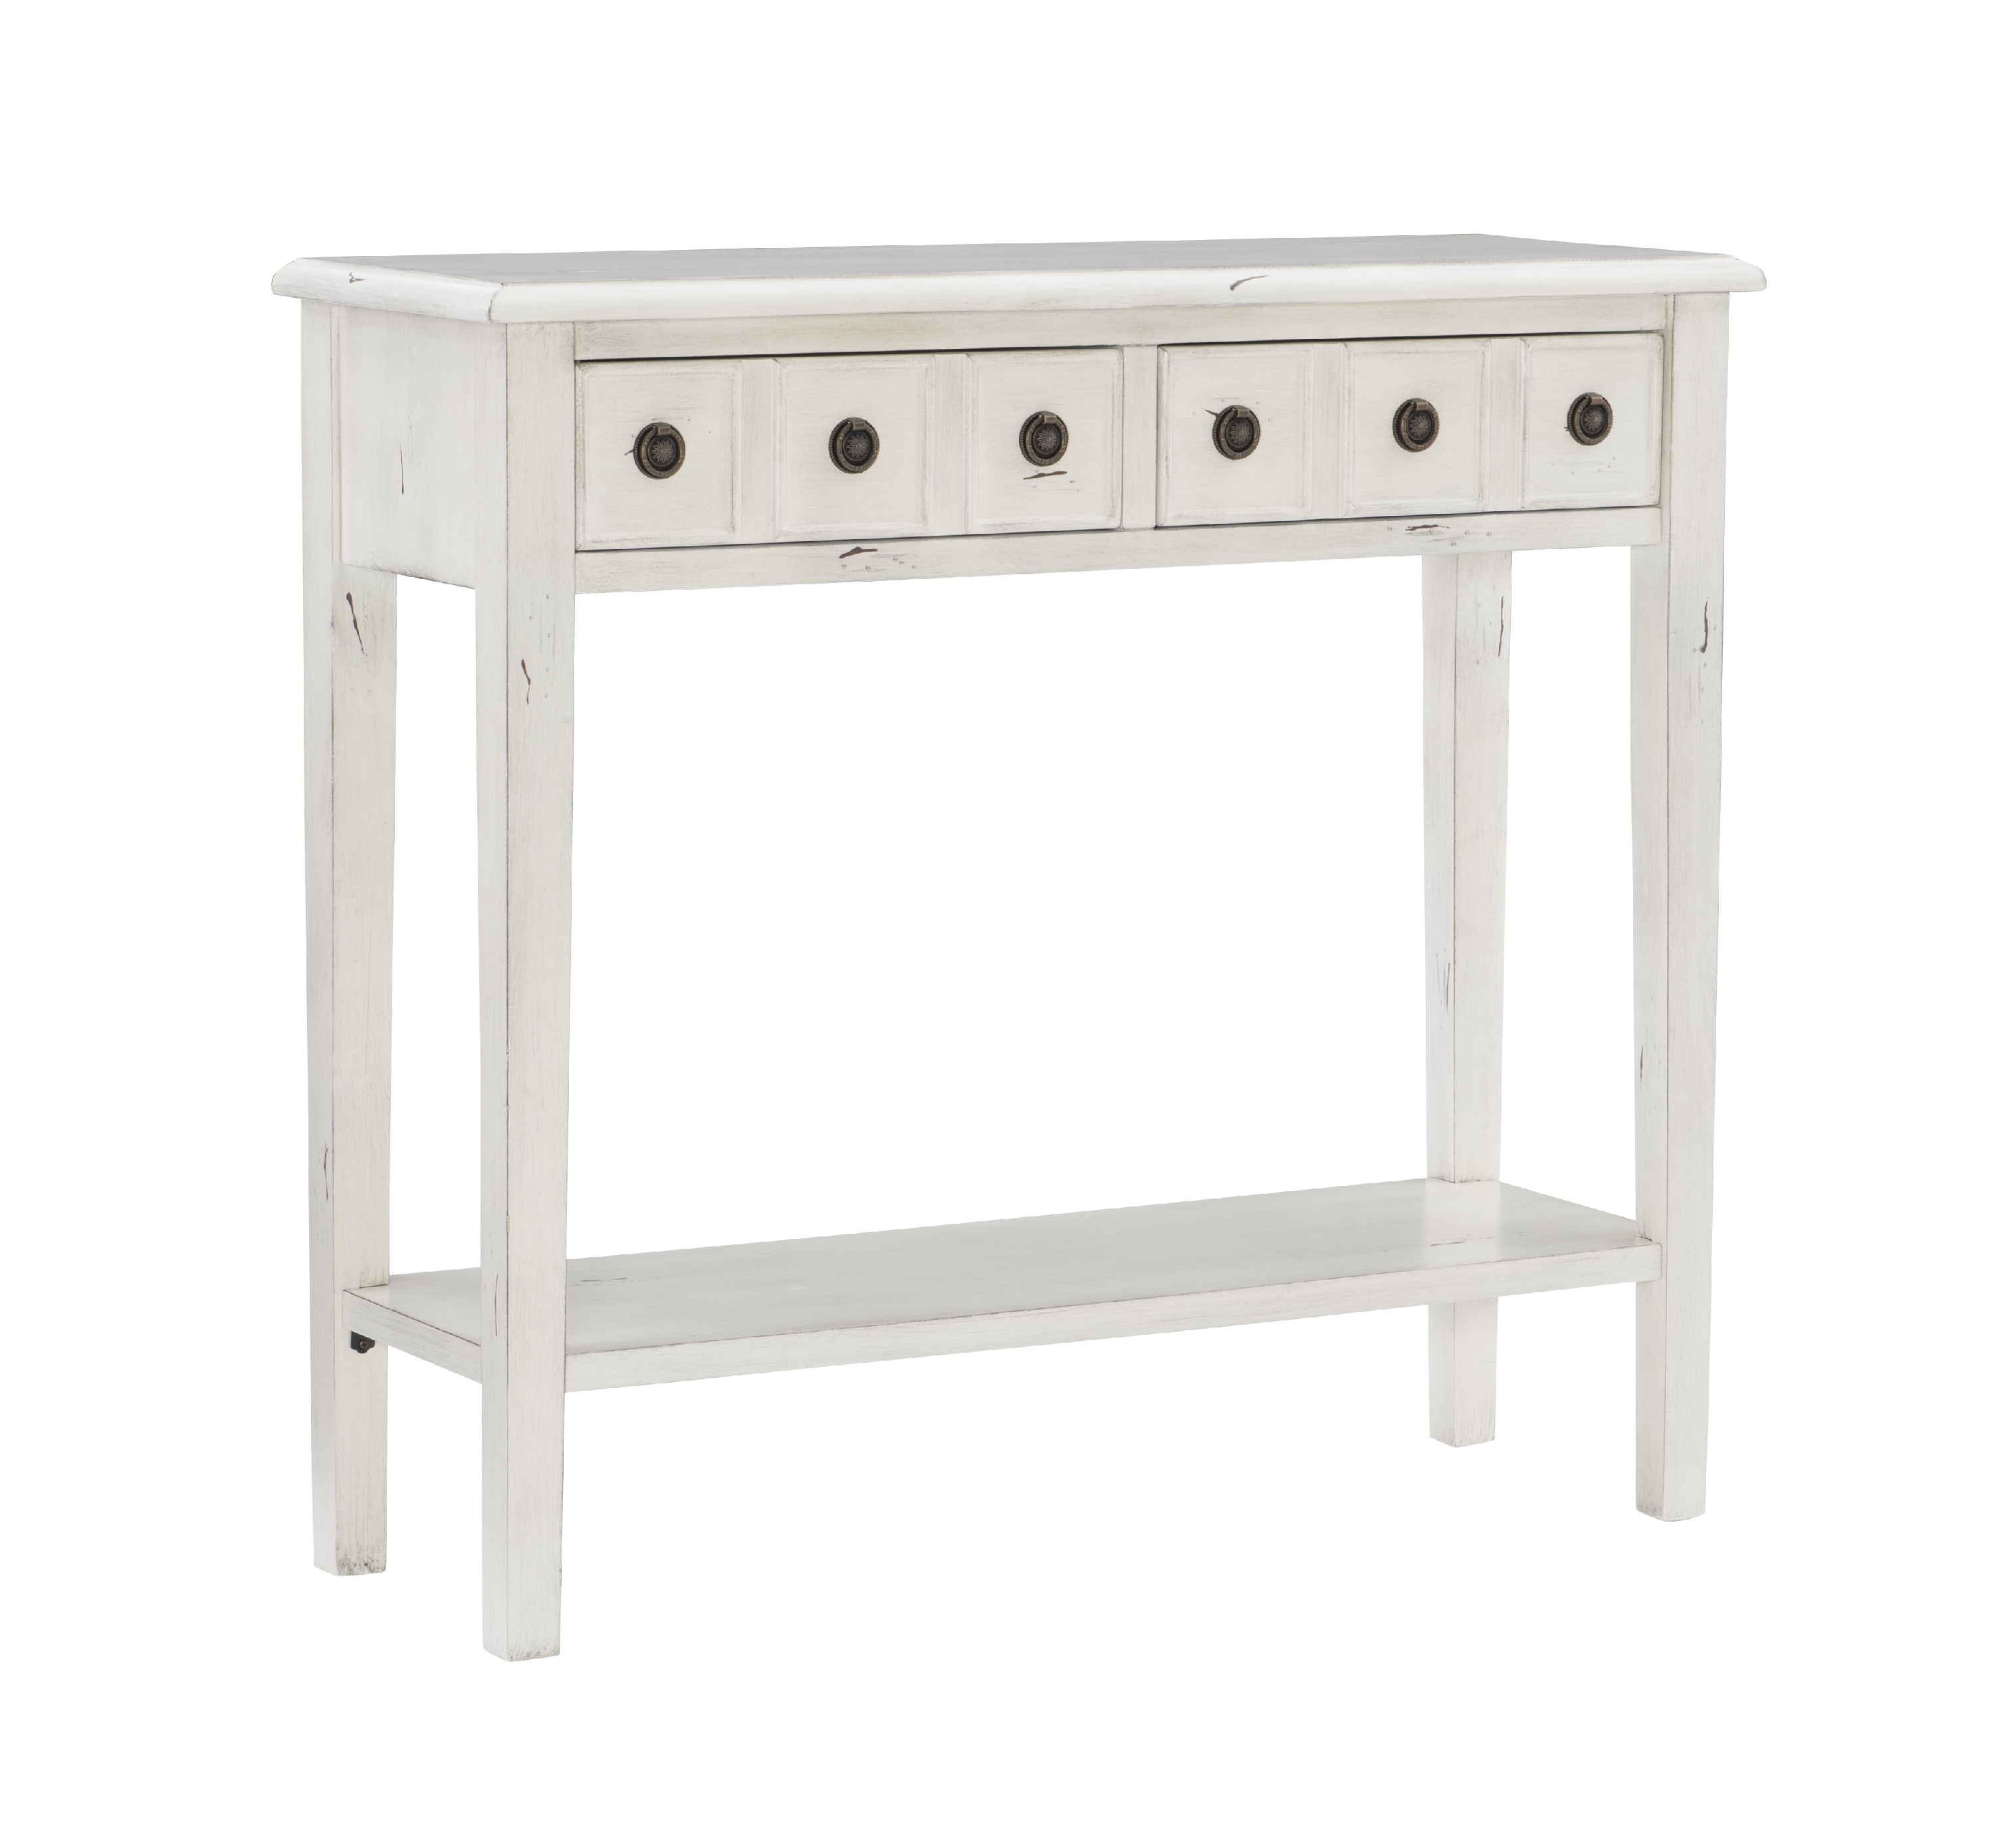 Sadie Farmhouse 2-Drawer Short Console Table with Shelf, Cream - image 1 of 13